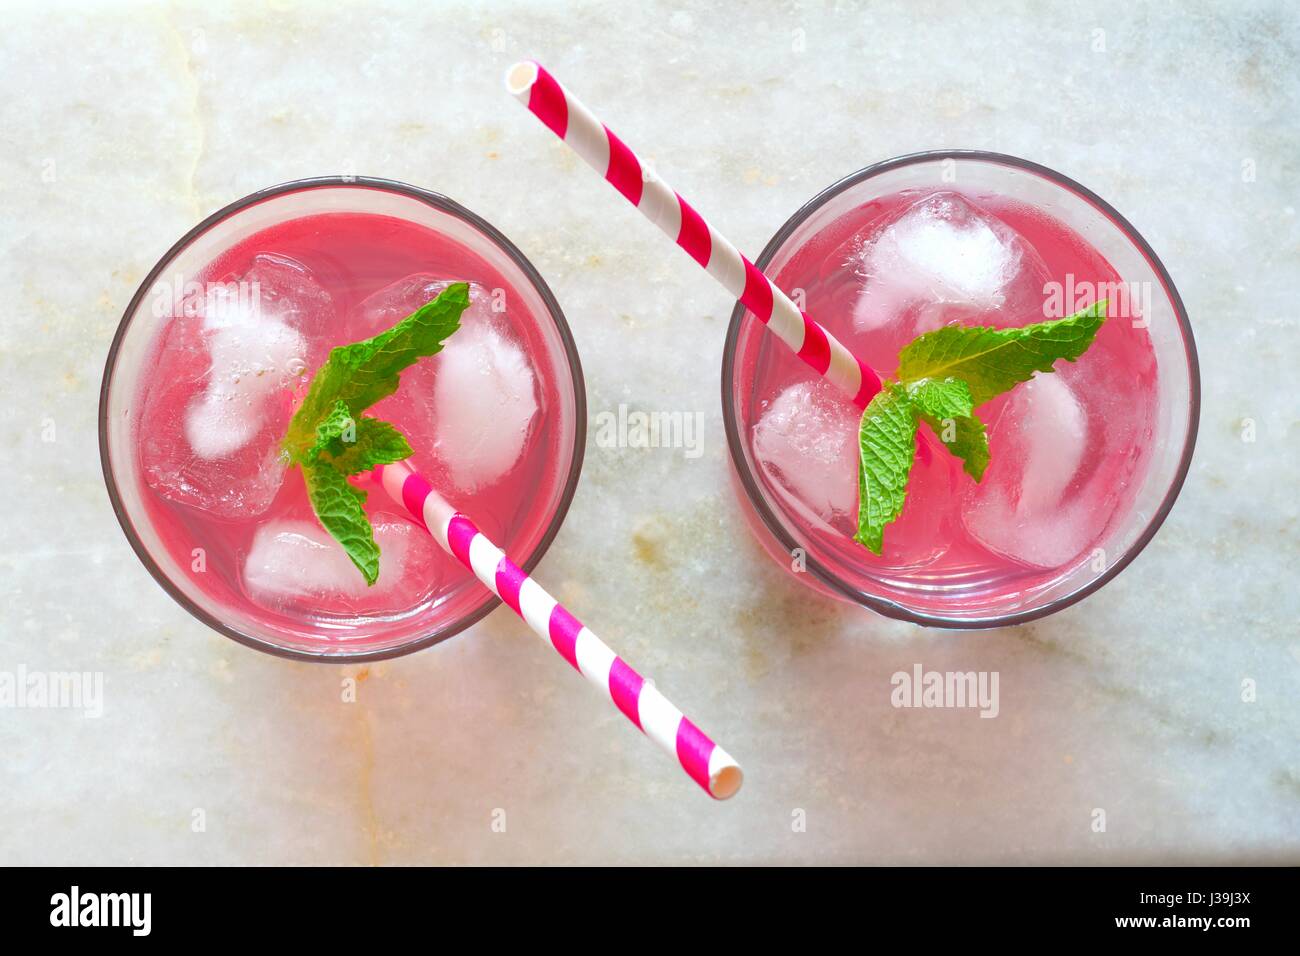 Two glasses of pink lemonade with mint, overhead view on a white marble background Stock Photo